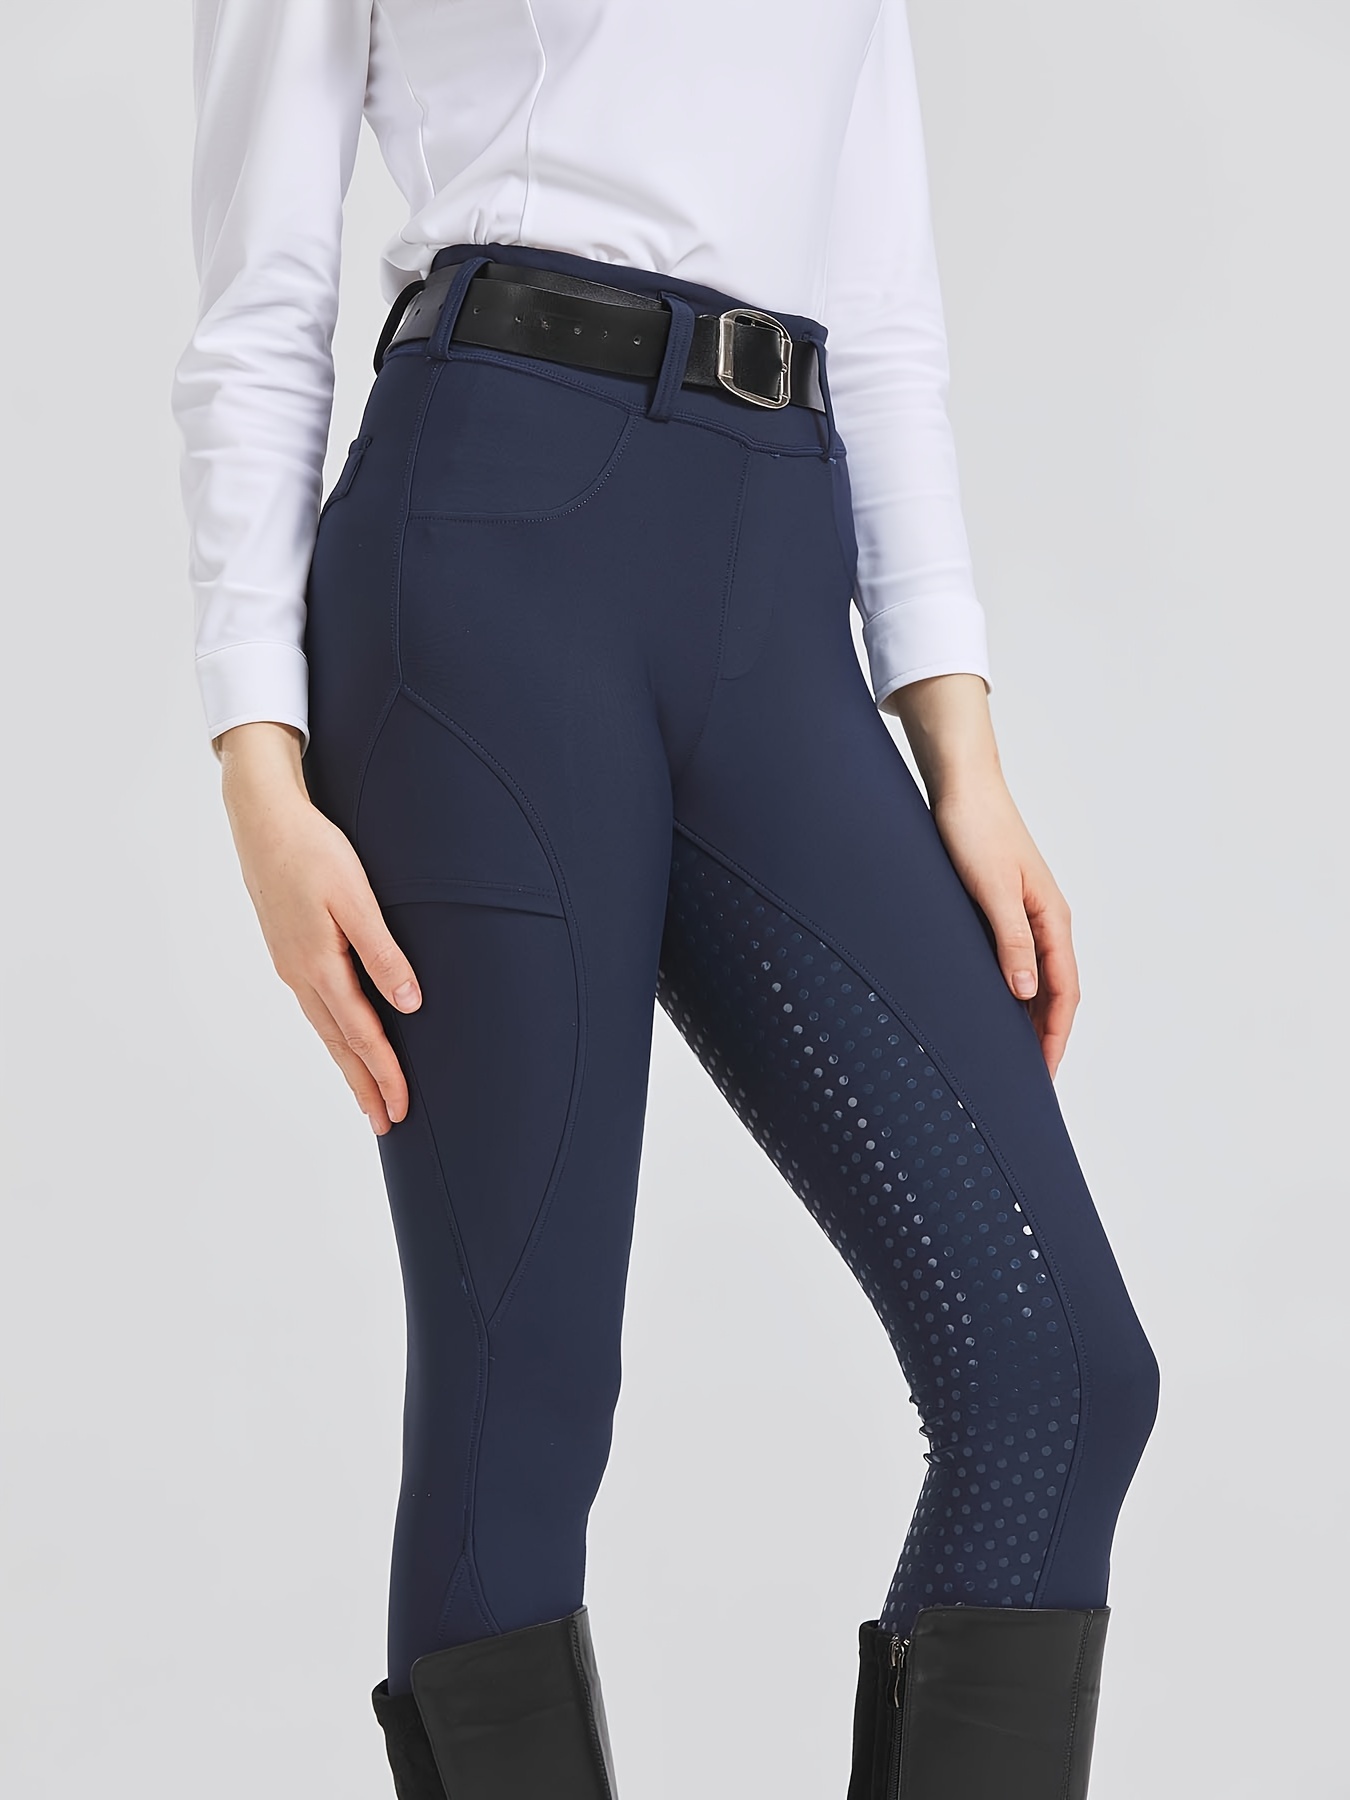 Equestrian riding leggings and breeches with built-in underwear